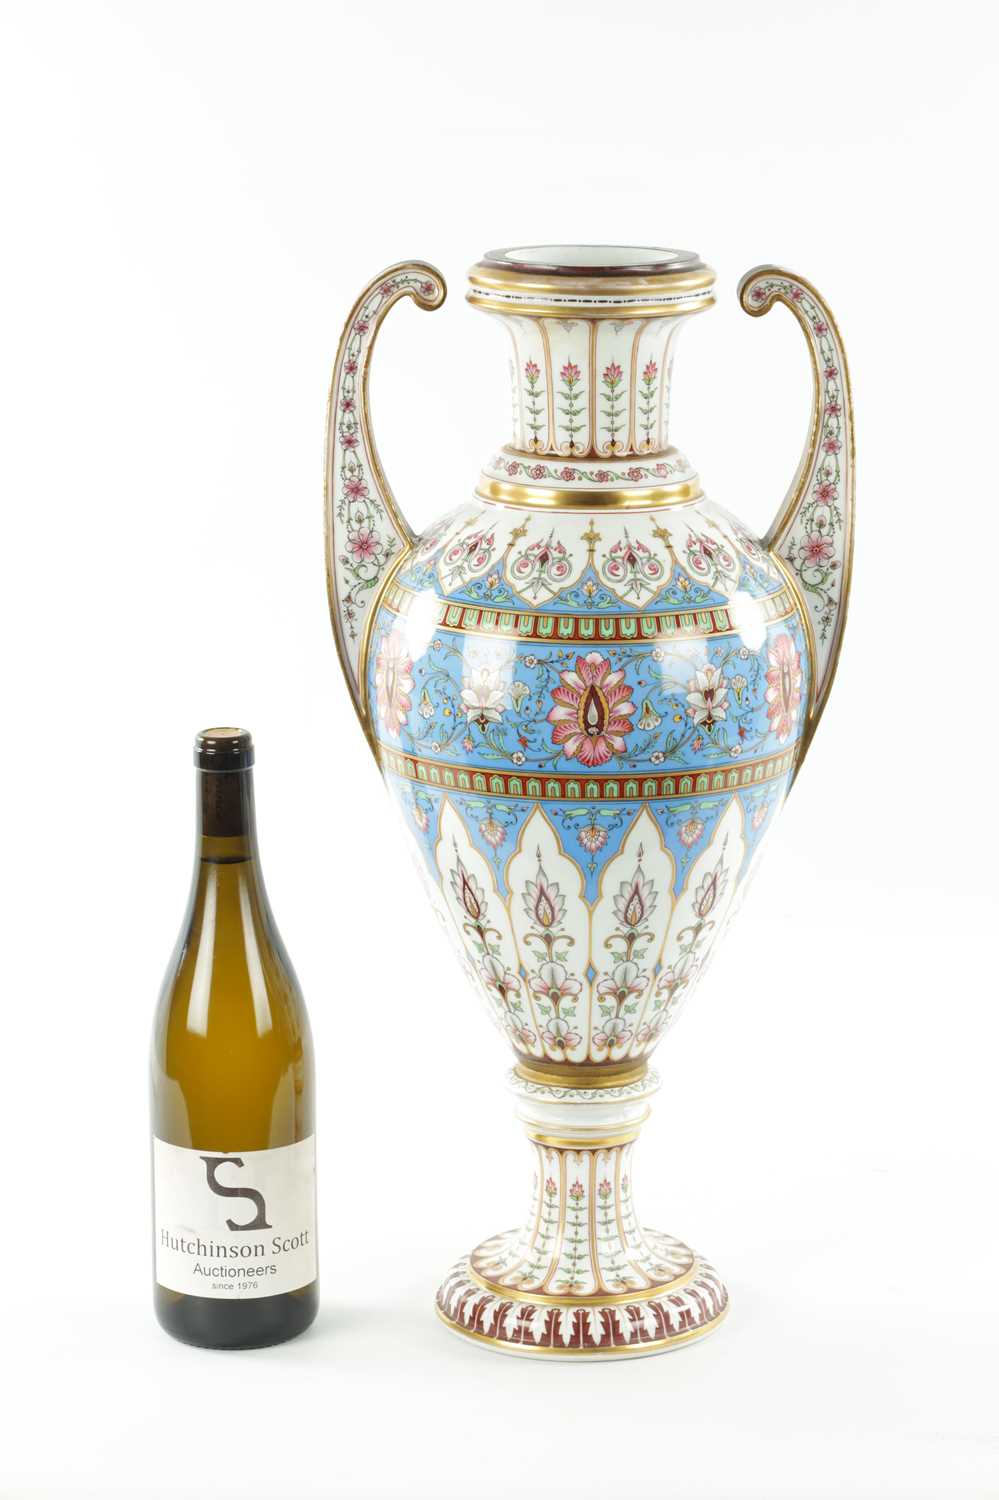 A LARGE LATE 19TH CENTURY PORCELAIN VASE POSSIBLY RUSSIAN - Image 2 of 8